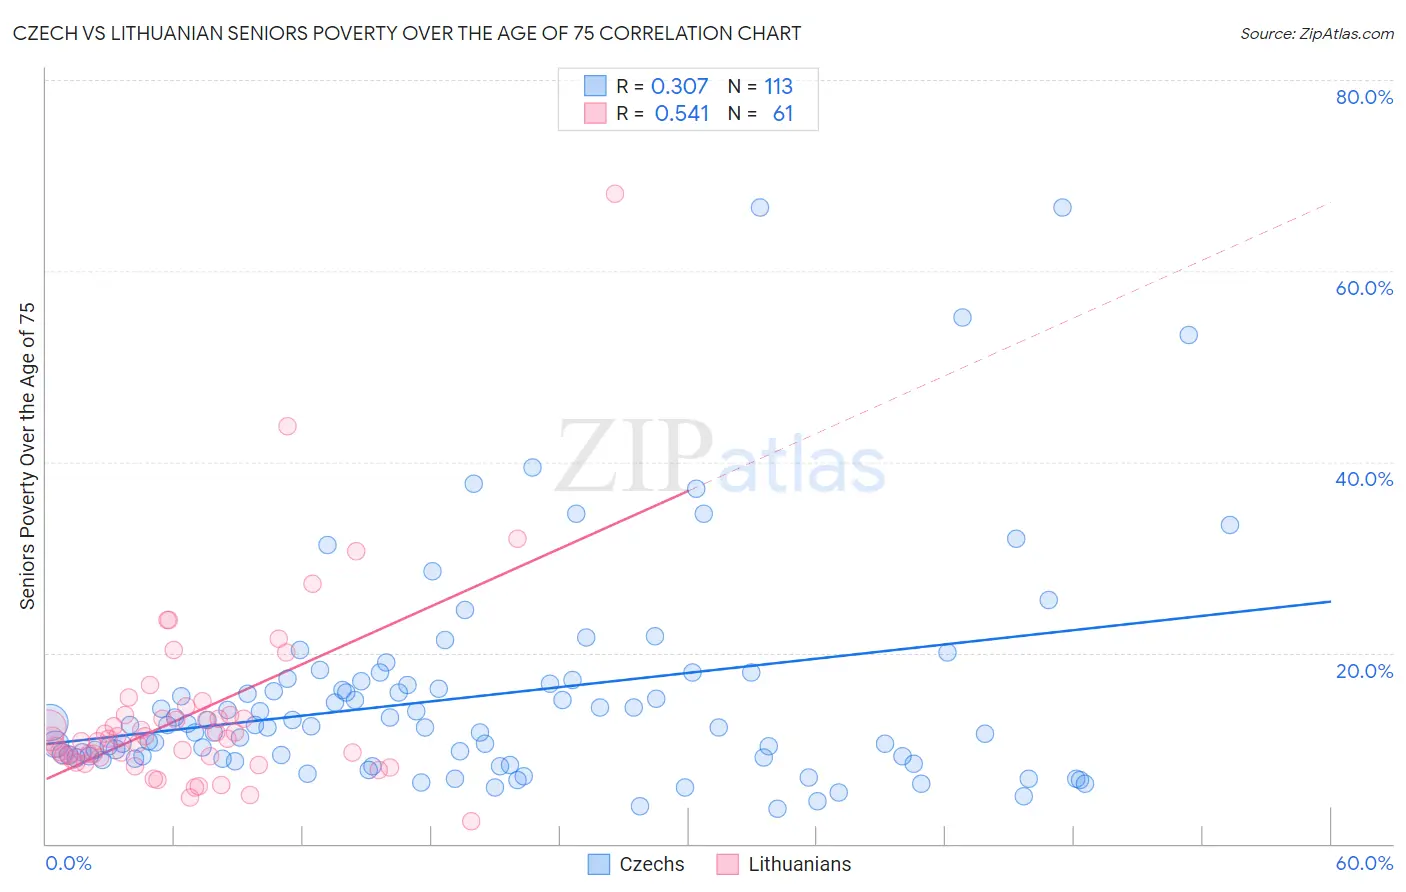 Czech vs Lithuanian Seniors Poverty Over the Age of 75